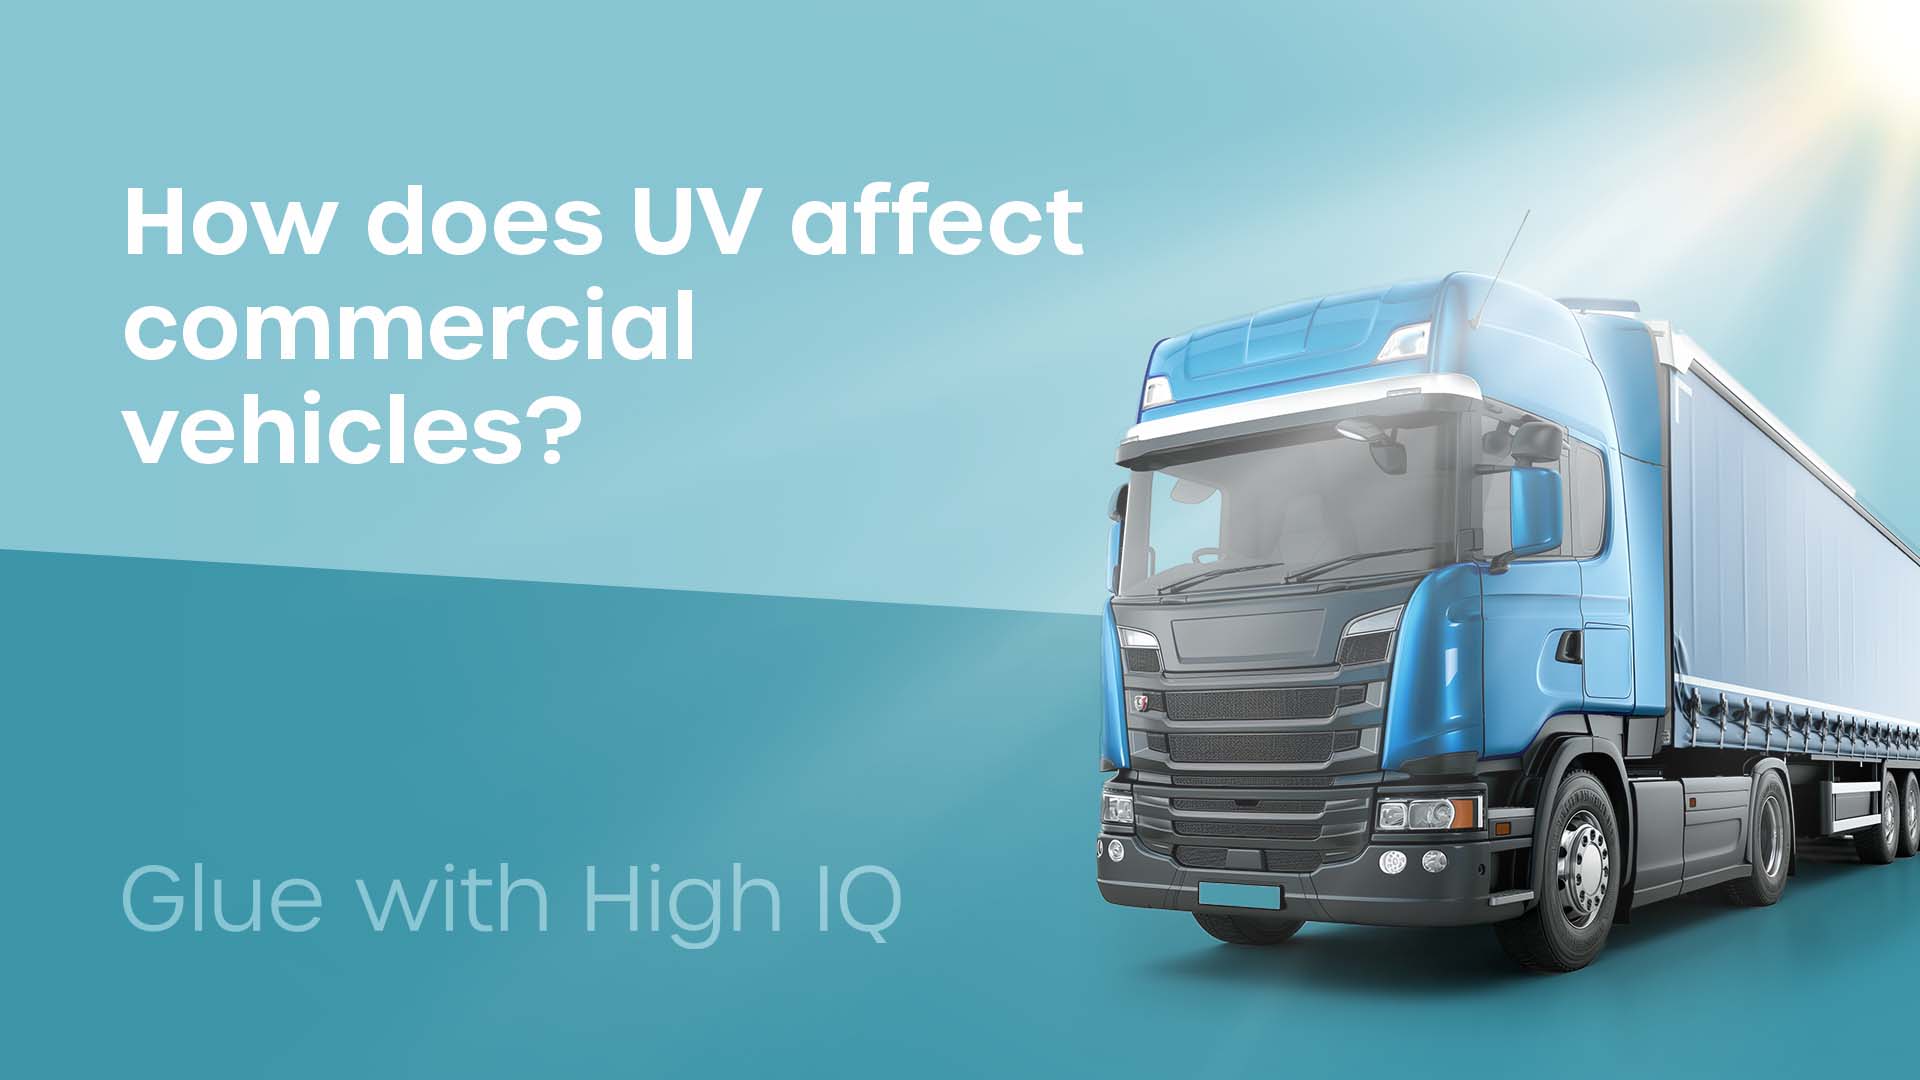 How does UV affect vehicles?